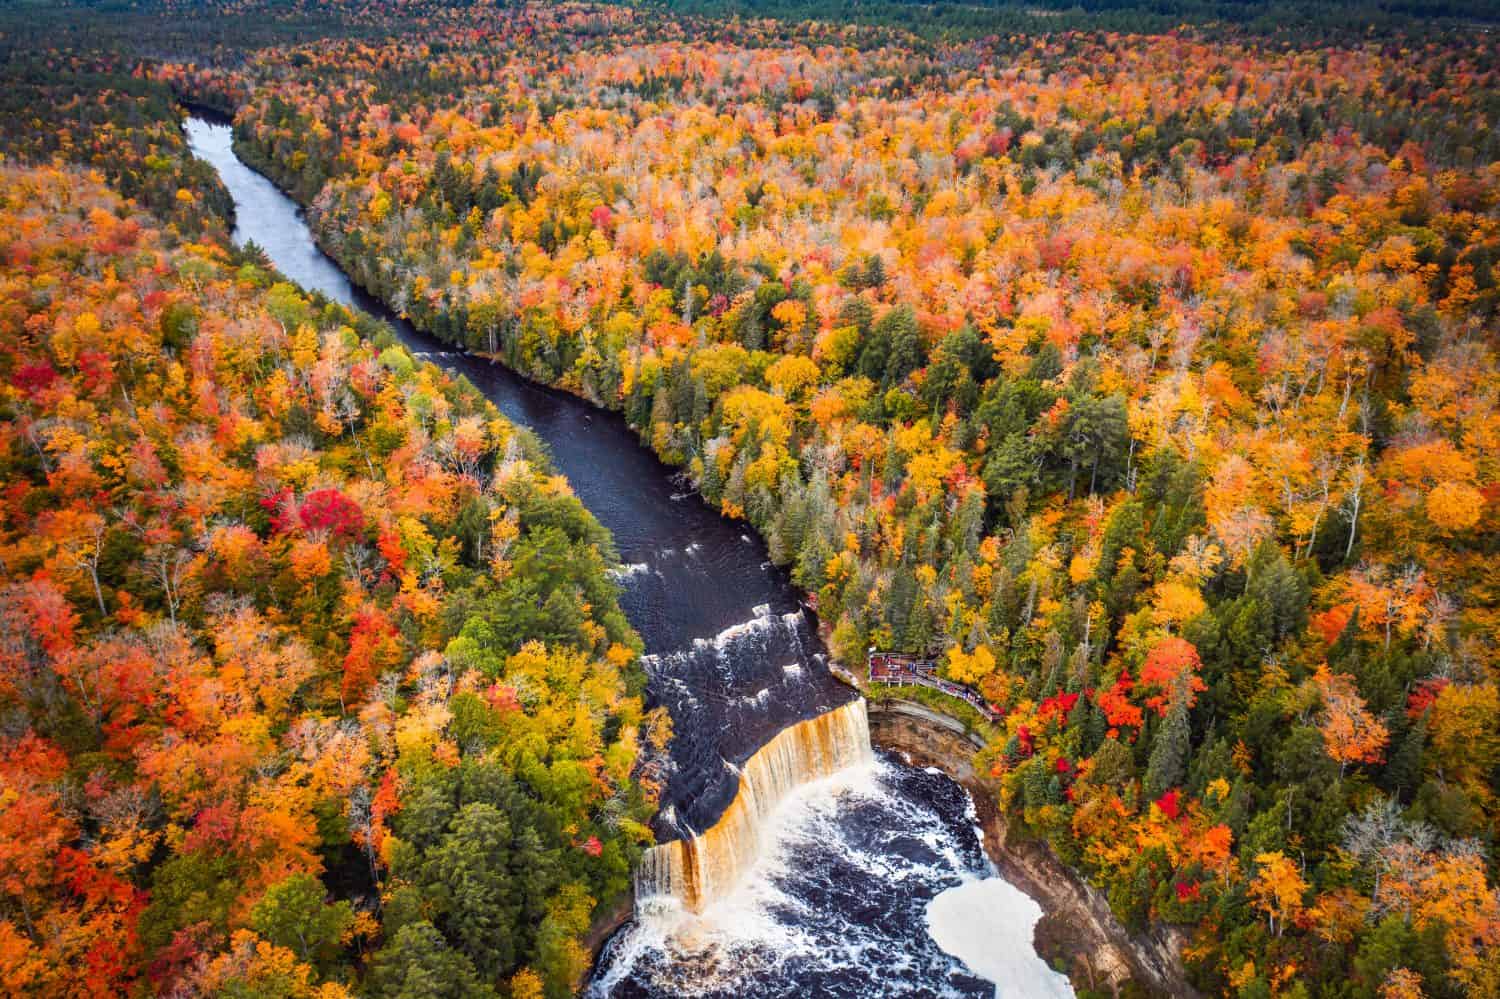 Incredible aerial photograph of the upper waterfall cascade at Tahquamenon Falls with beautiful autumn foliage on the trees with green, yellow, red and orange leaves surrounding the river.